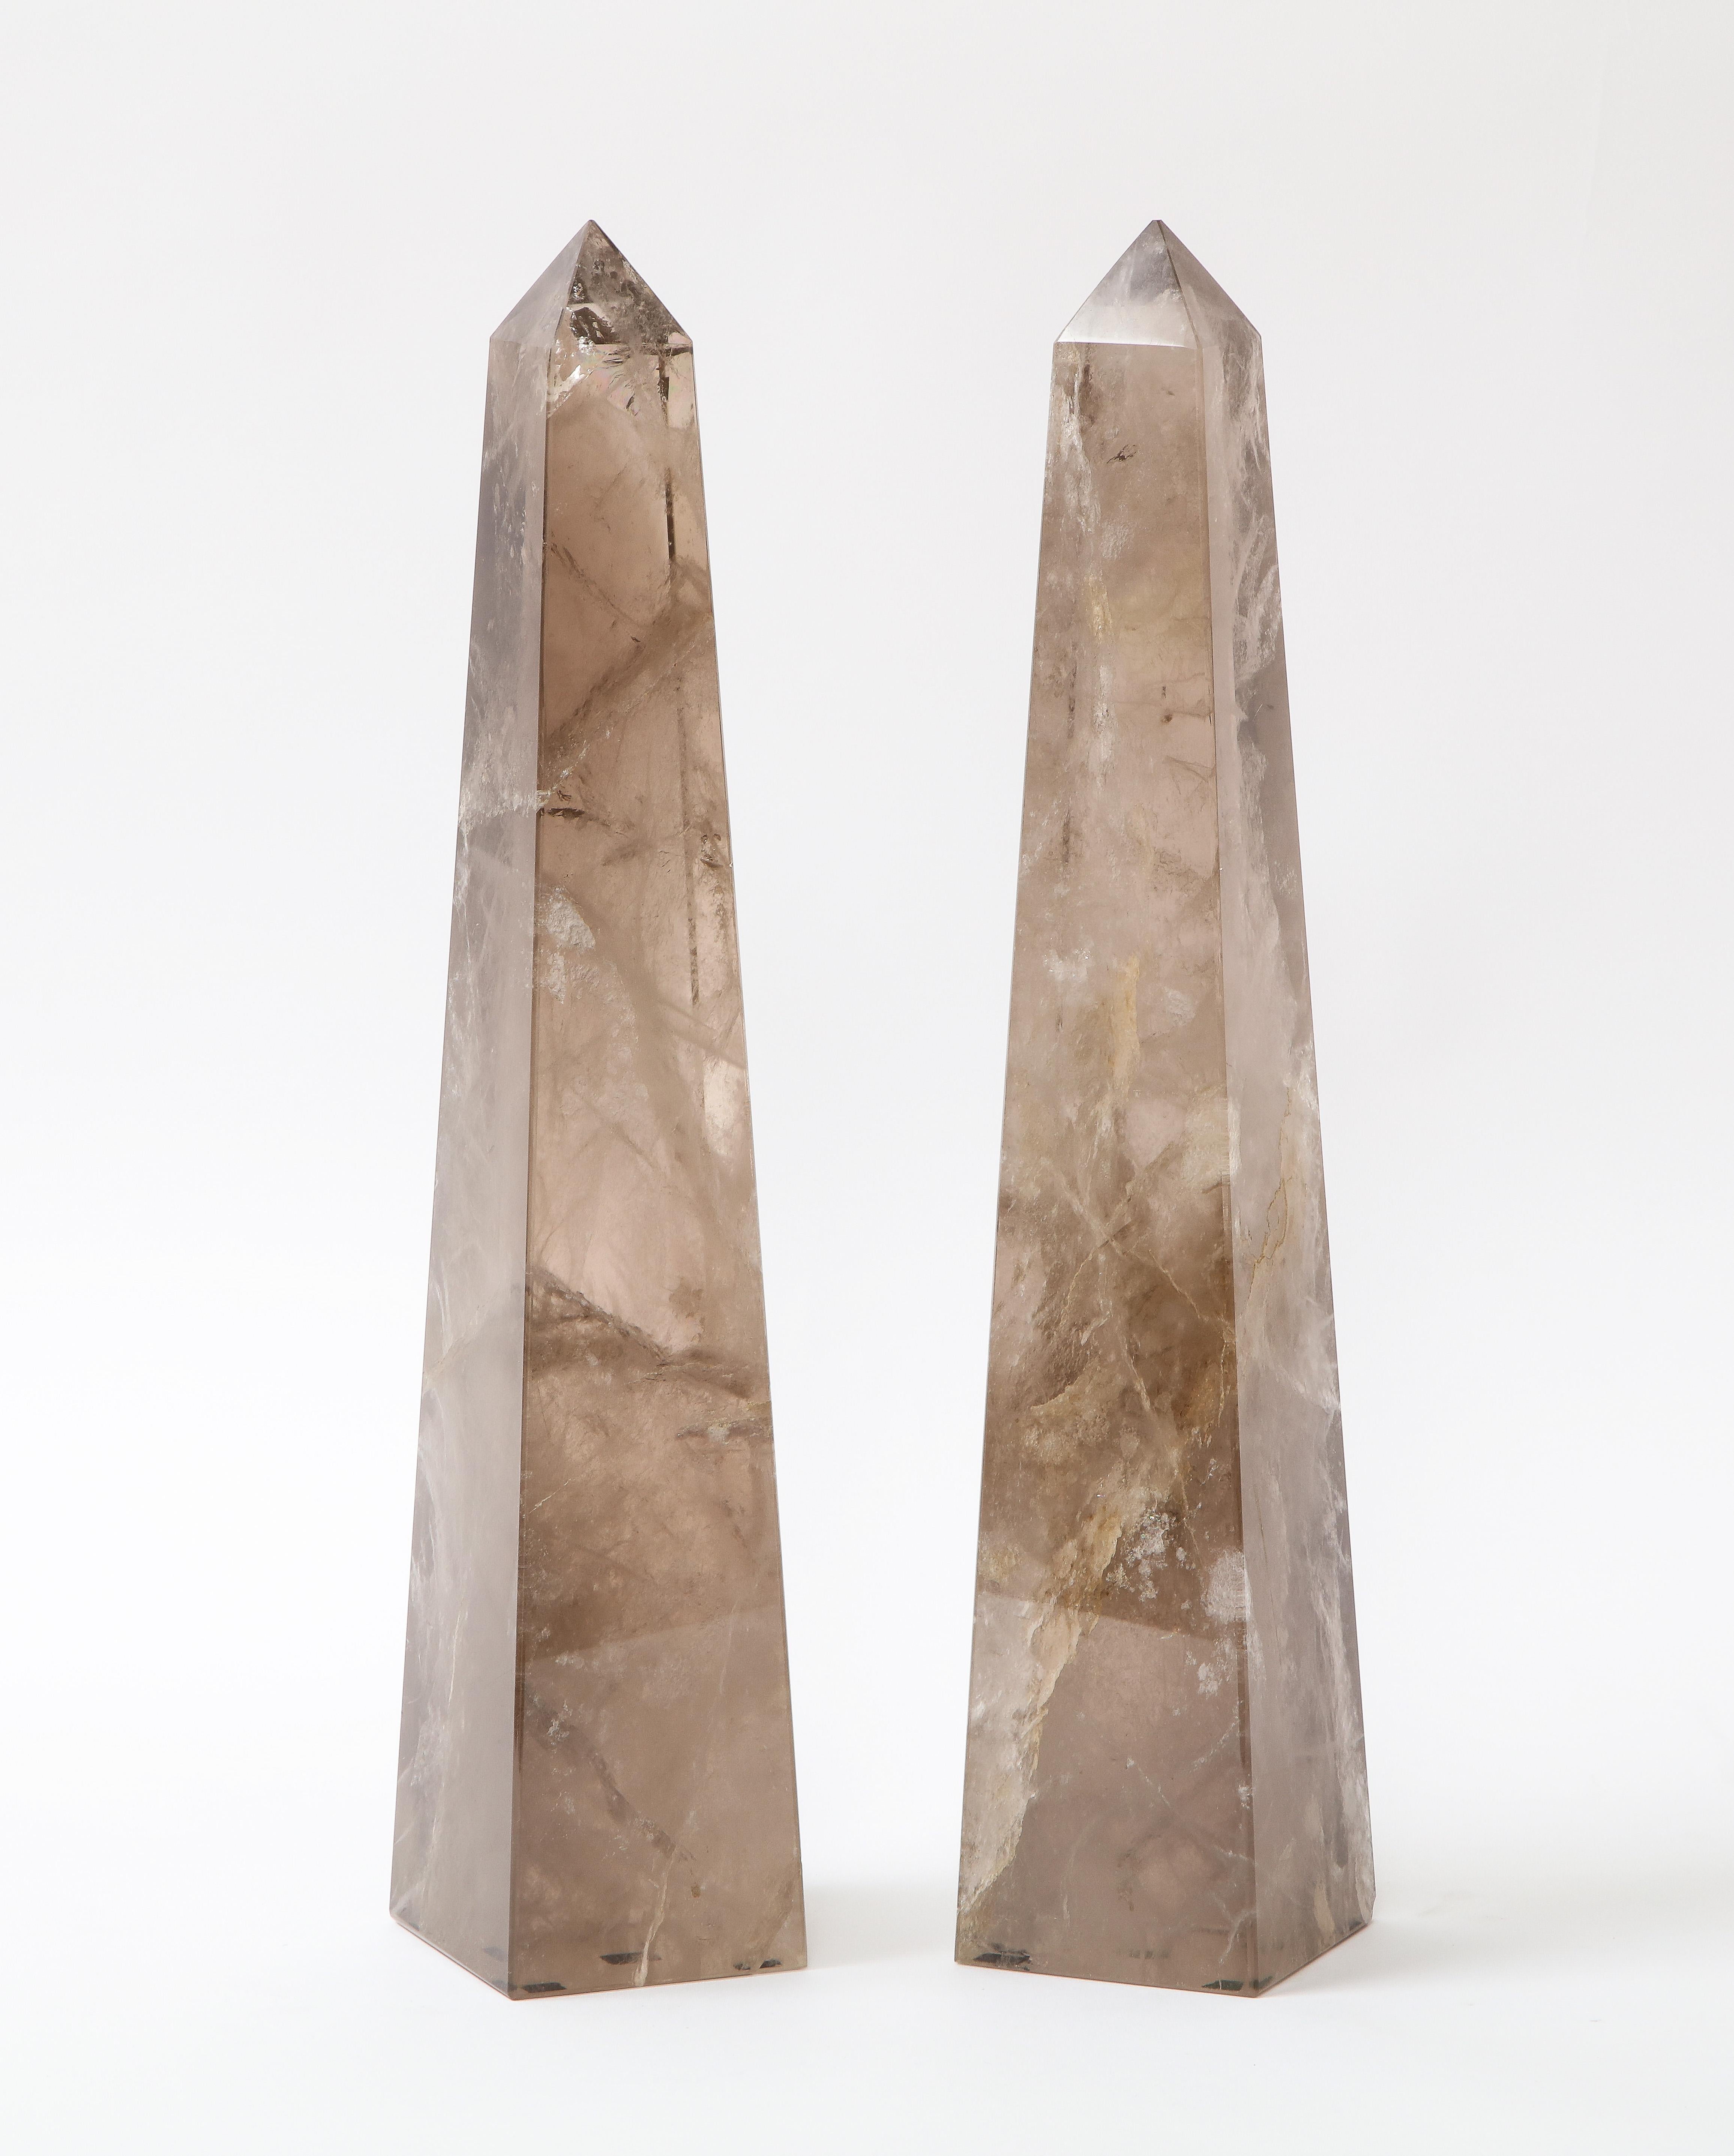 A gorgeous and quite decorative pair of Mid-Century Modern French Smokey rock crystal quartz hand carved and hand-polished obelisks. Each obelisk is made of a natural Smokey rock crystal quartz which has been hand-diamond cut and hand-polished with